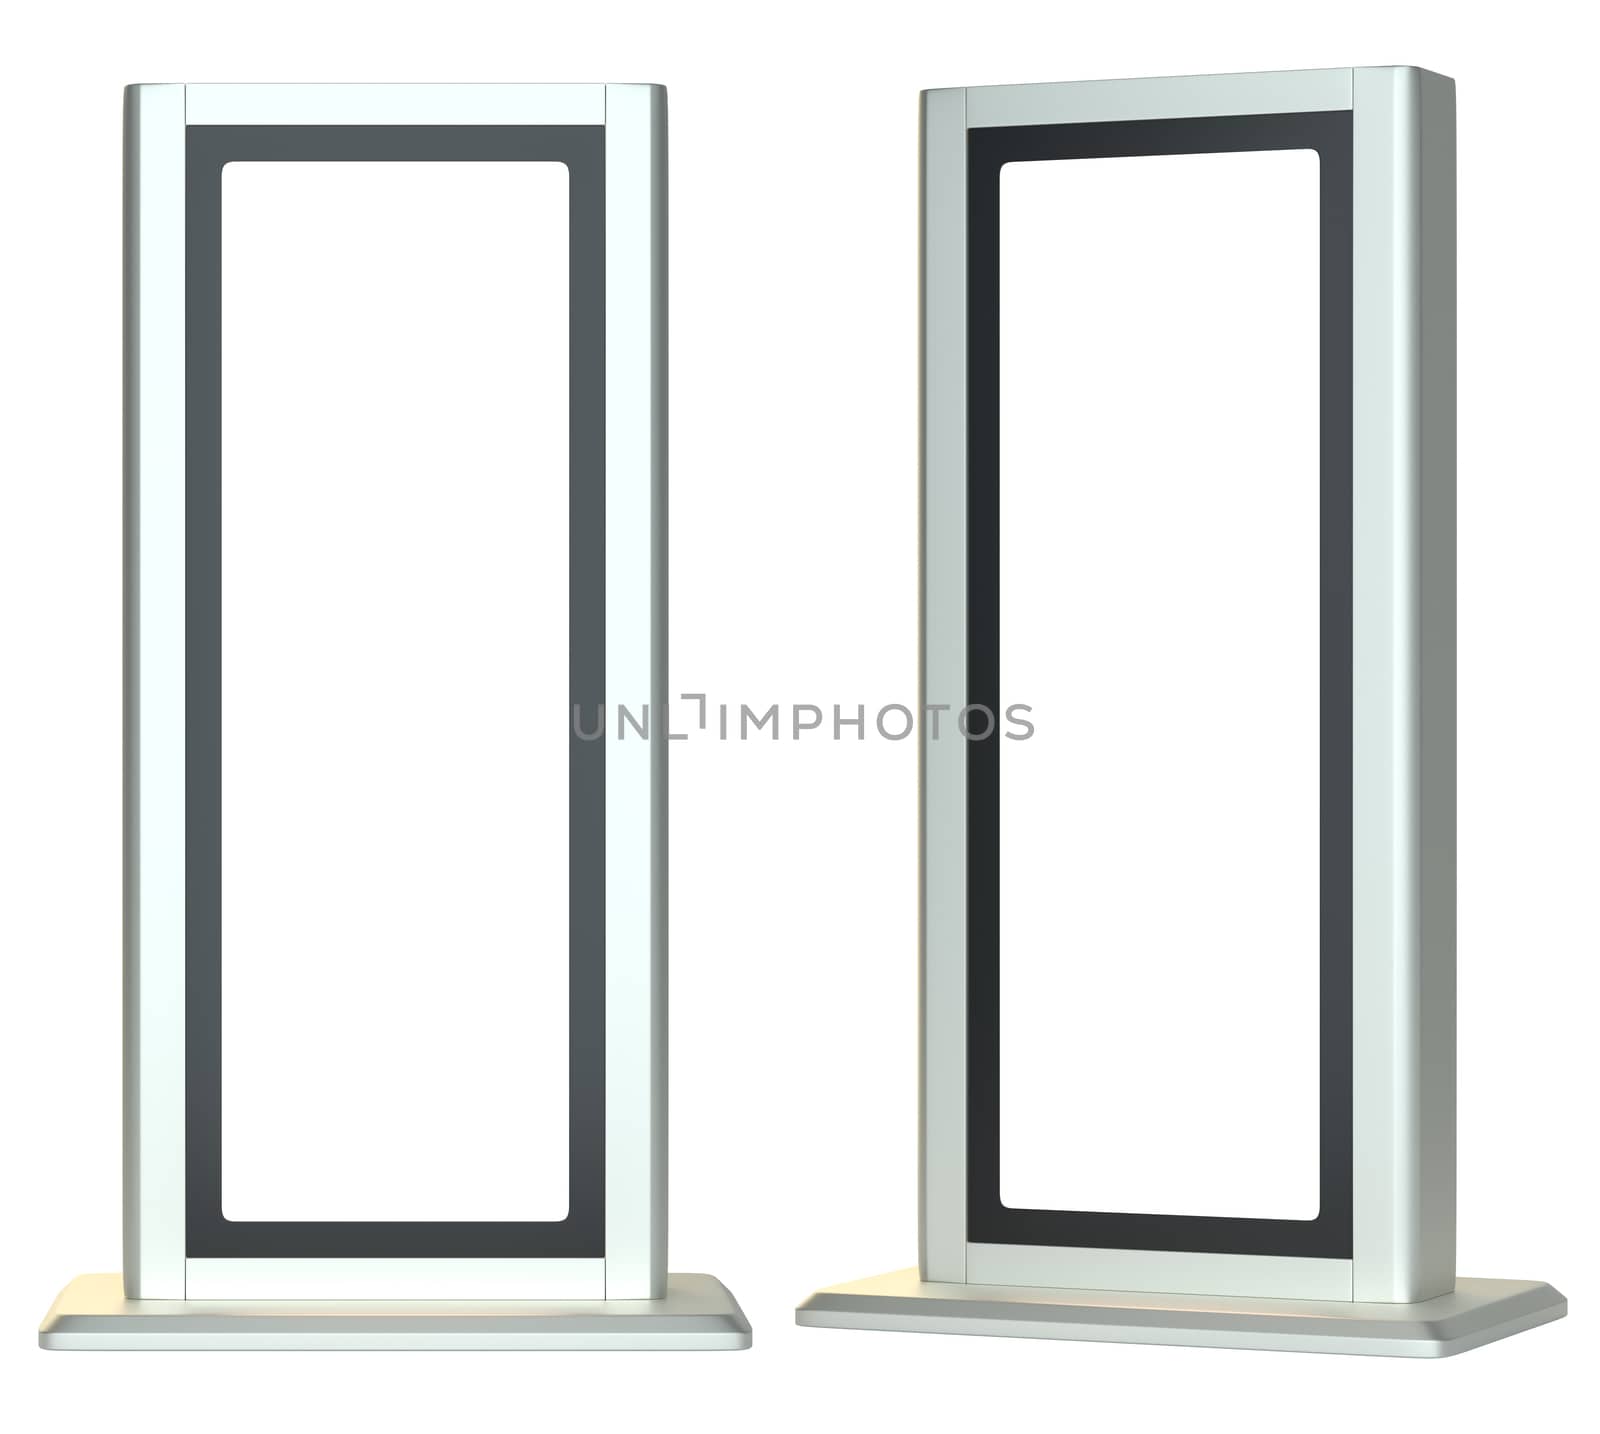 Blank lightboxes or signboards. Isolated on white background. 3D illustration